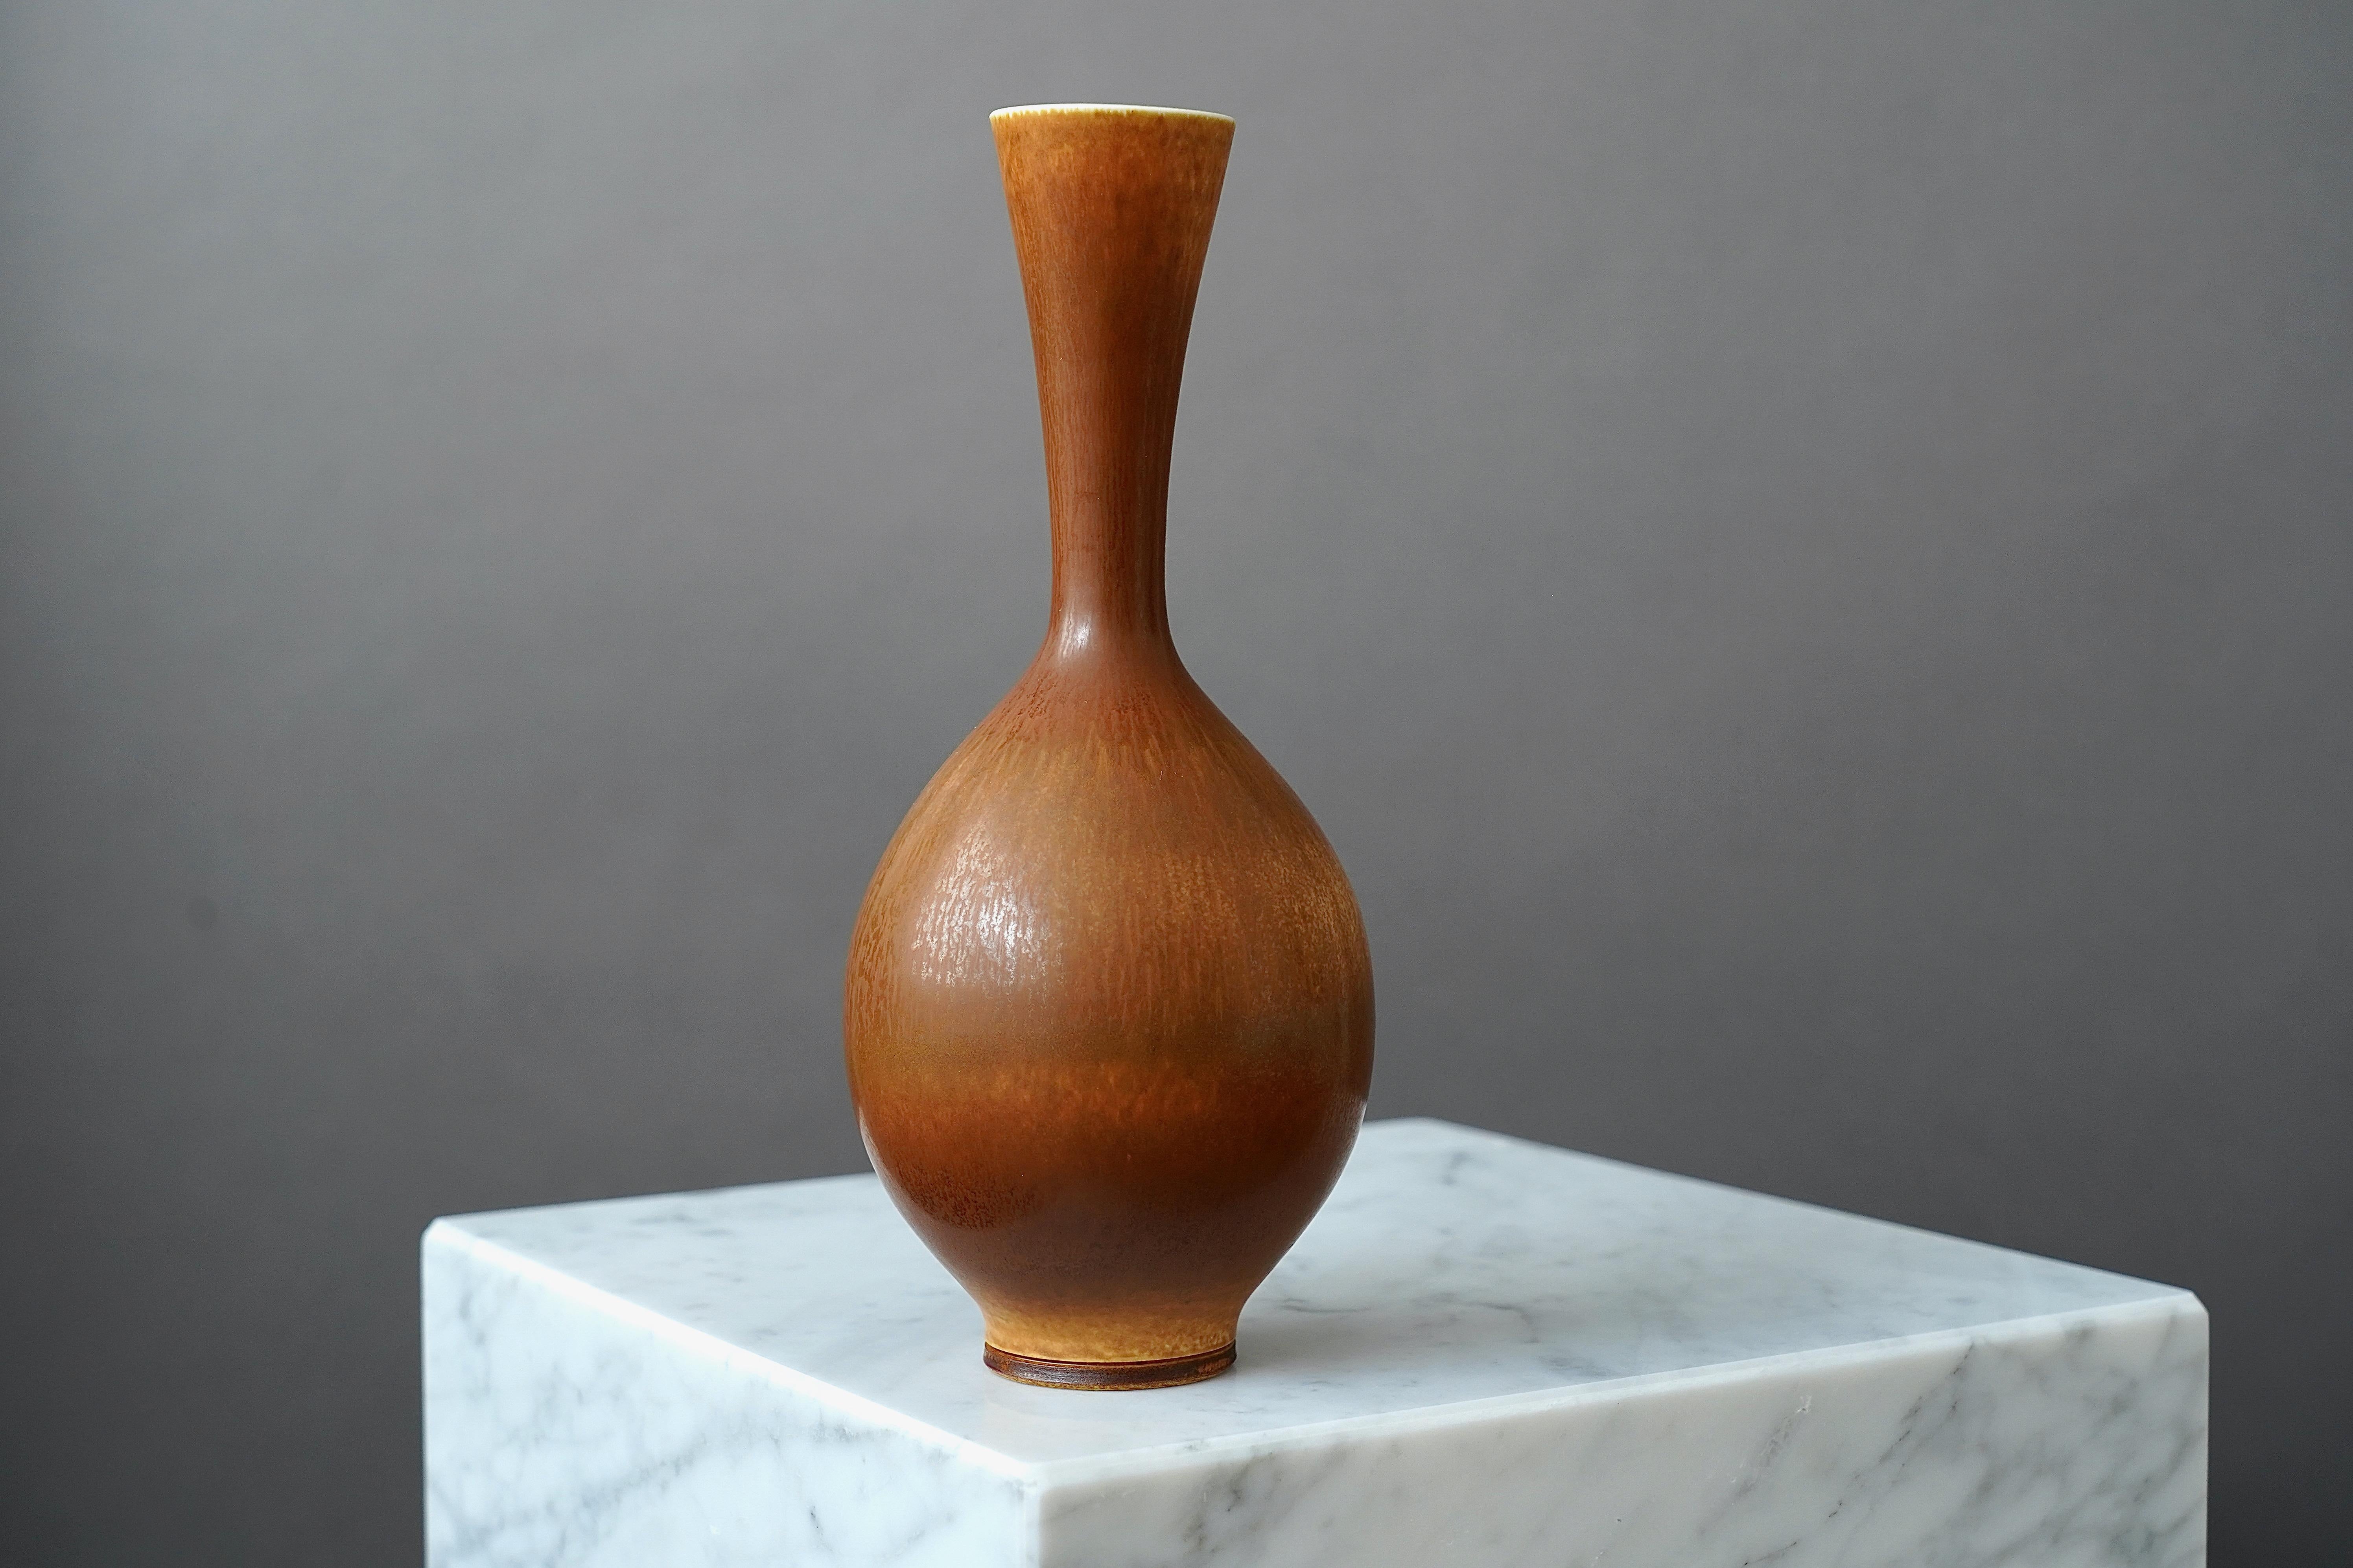 A beautiful stoneware vase with amazing hare’s fur glaze.
Made by master thrower Berndt Friberg, in the artist's studio at Gustavsberg, Sweden.

Excellent condition. Incised signature 